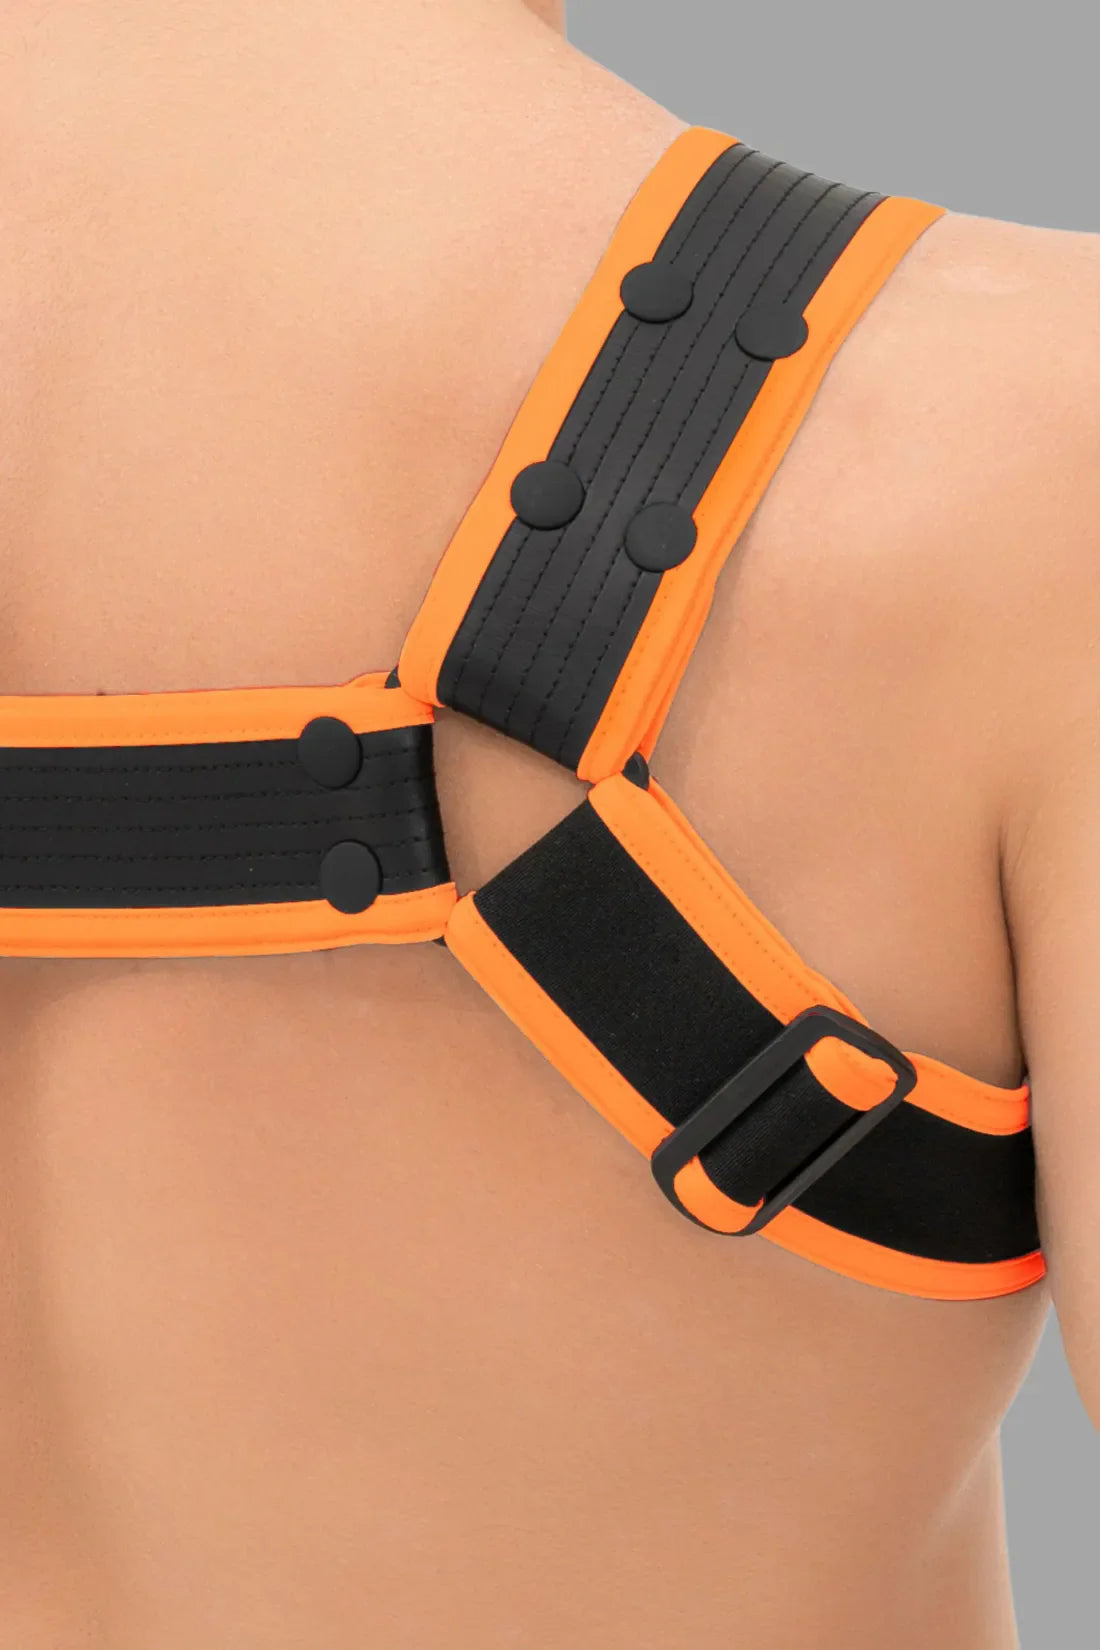 Outtox. Bulldog Harness with Snaps. Black and Orange